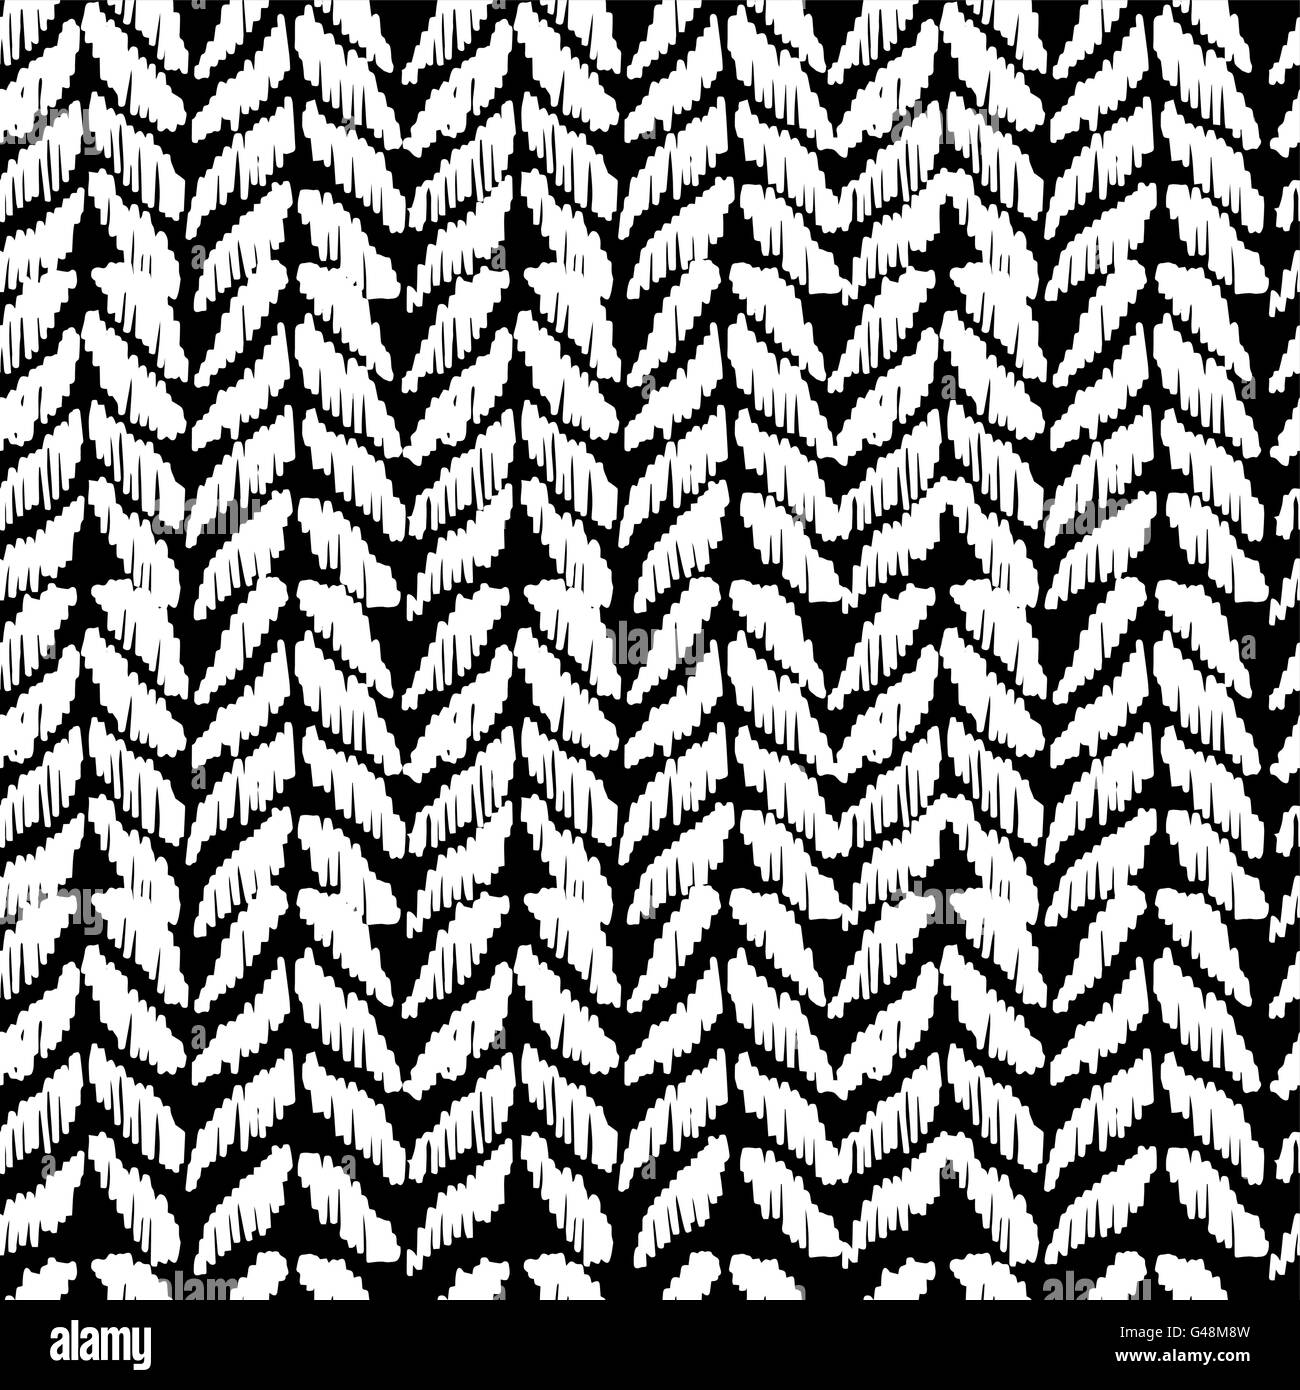 Vintage boho black and white seamless pattern background with monochrome hand paint elements. Ideal for fabric design Stock Vector